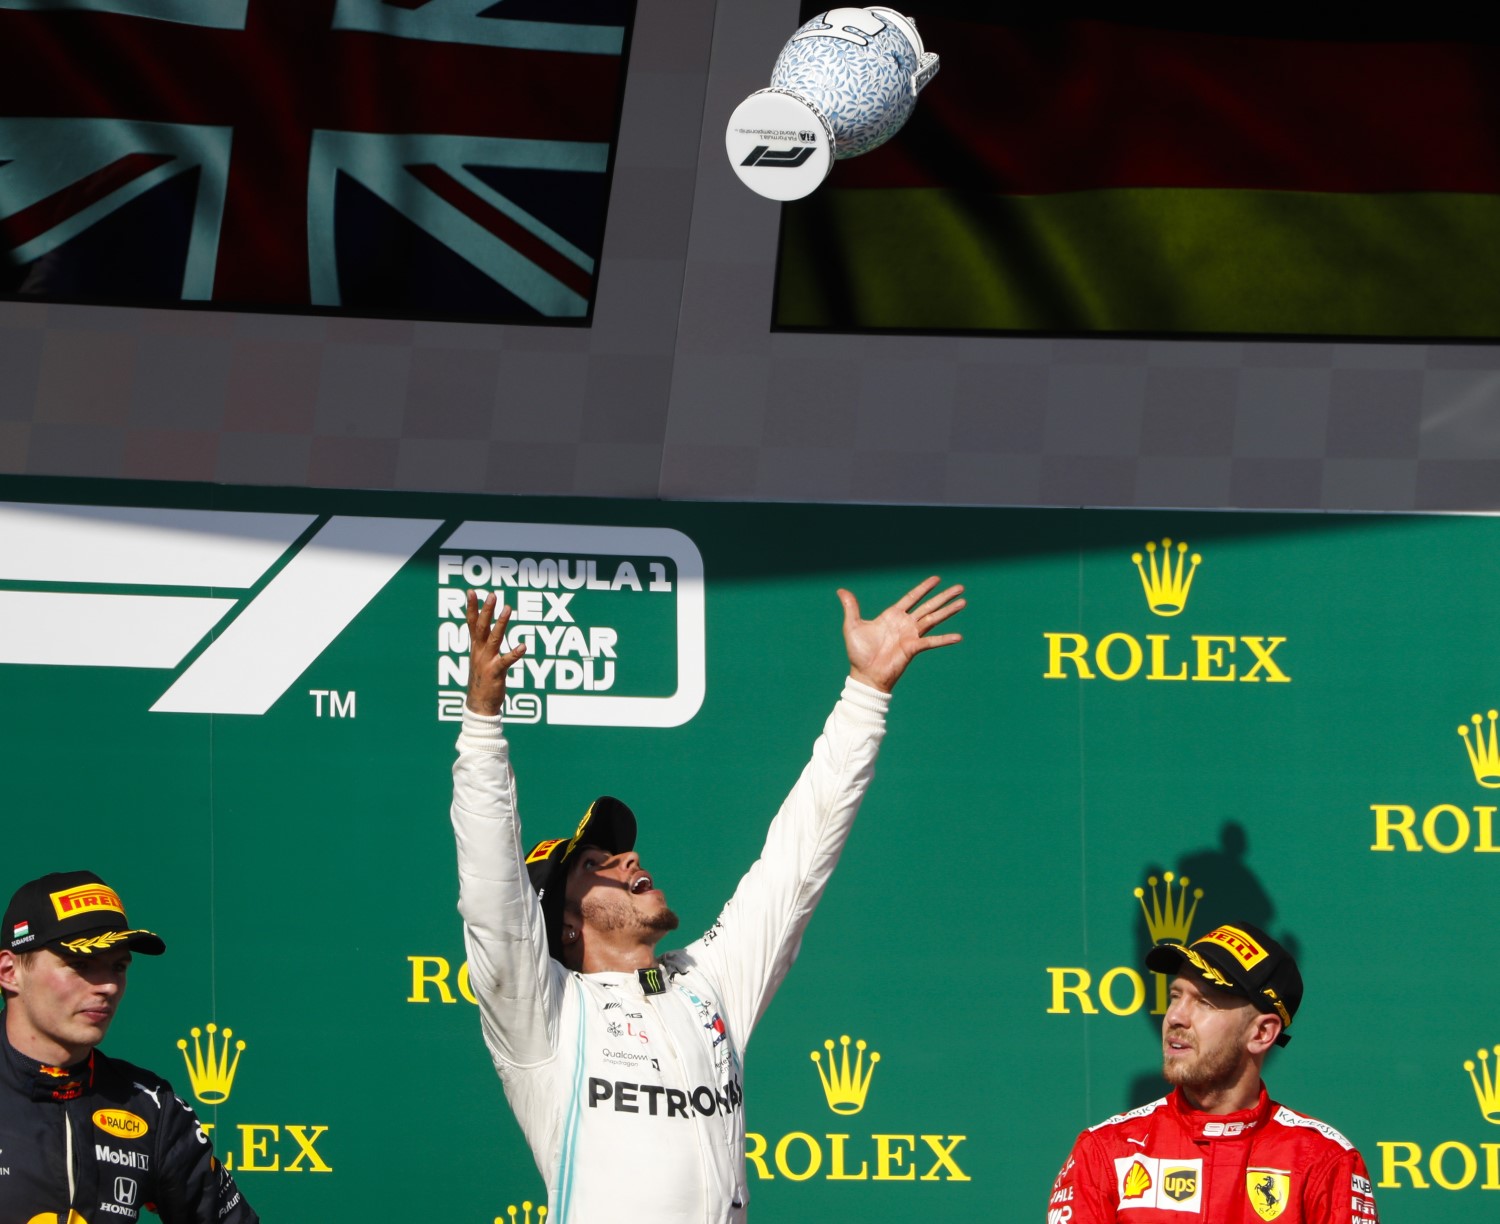 Losers Verstappen and Vettel watch winner Hamilton toss his winning trophy in the air